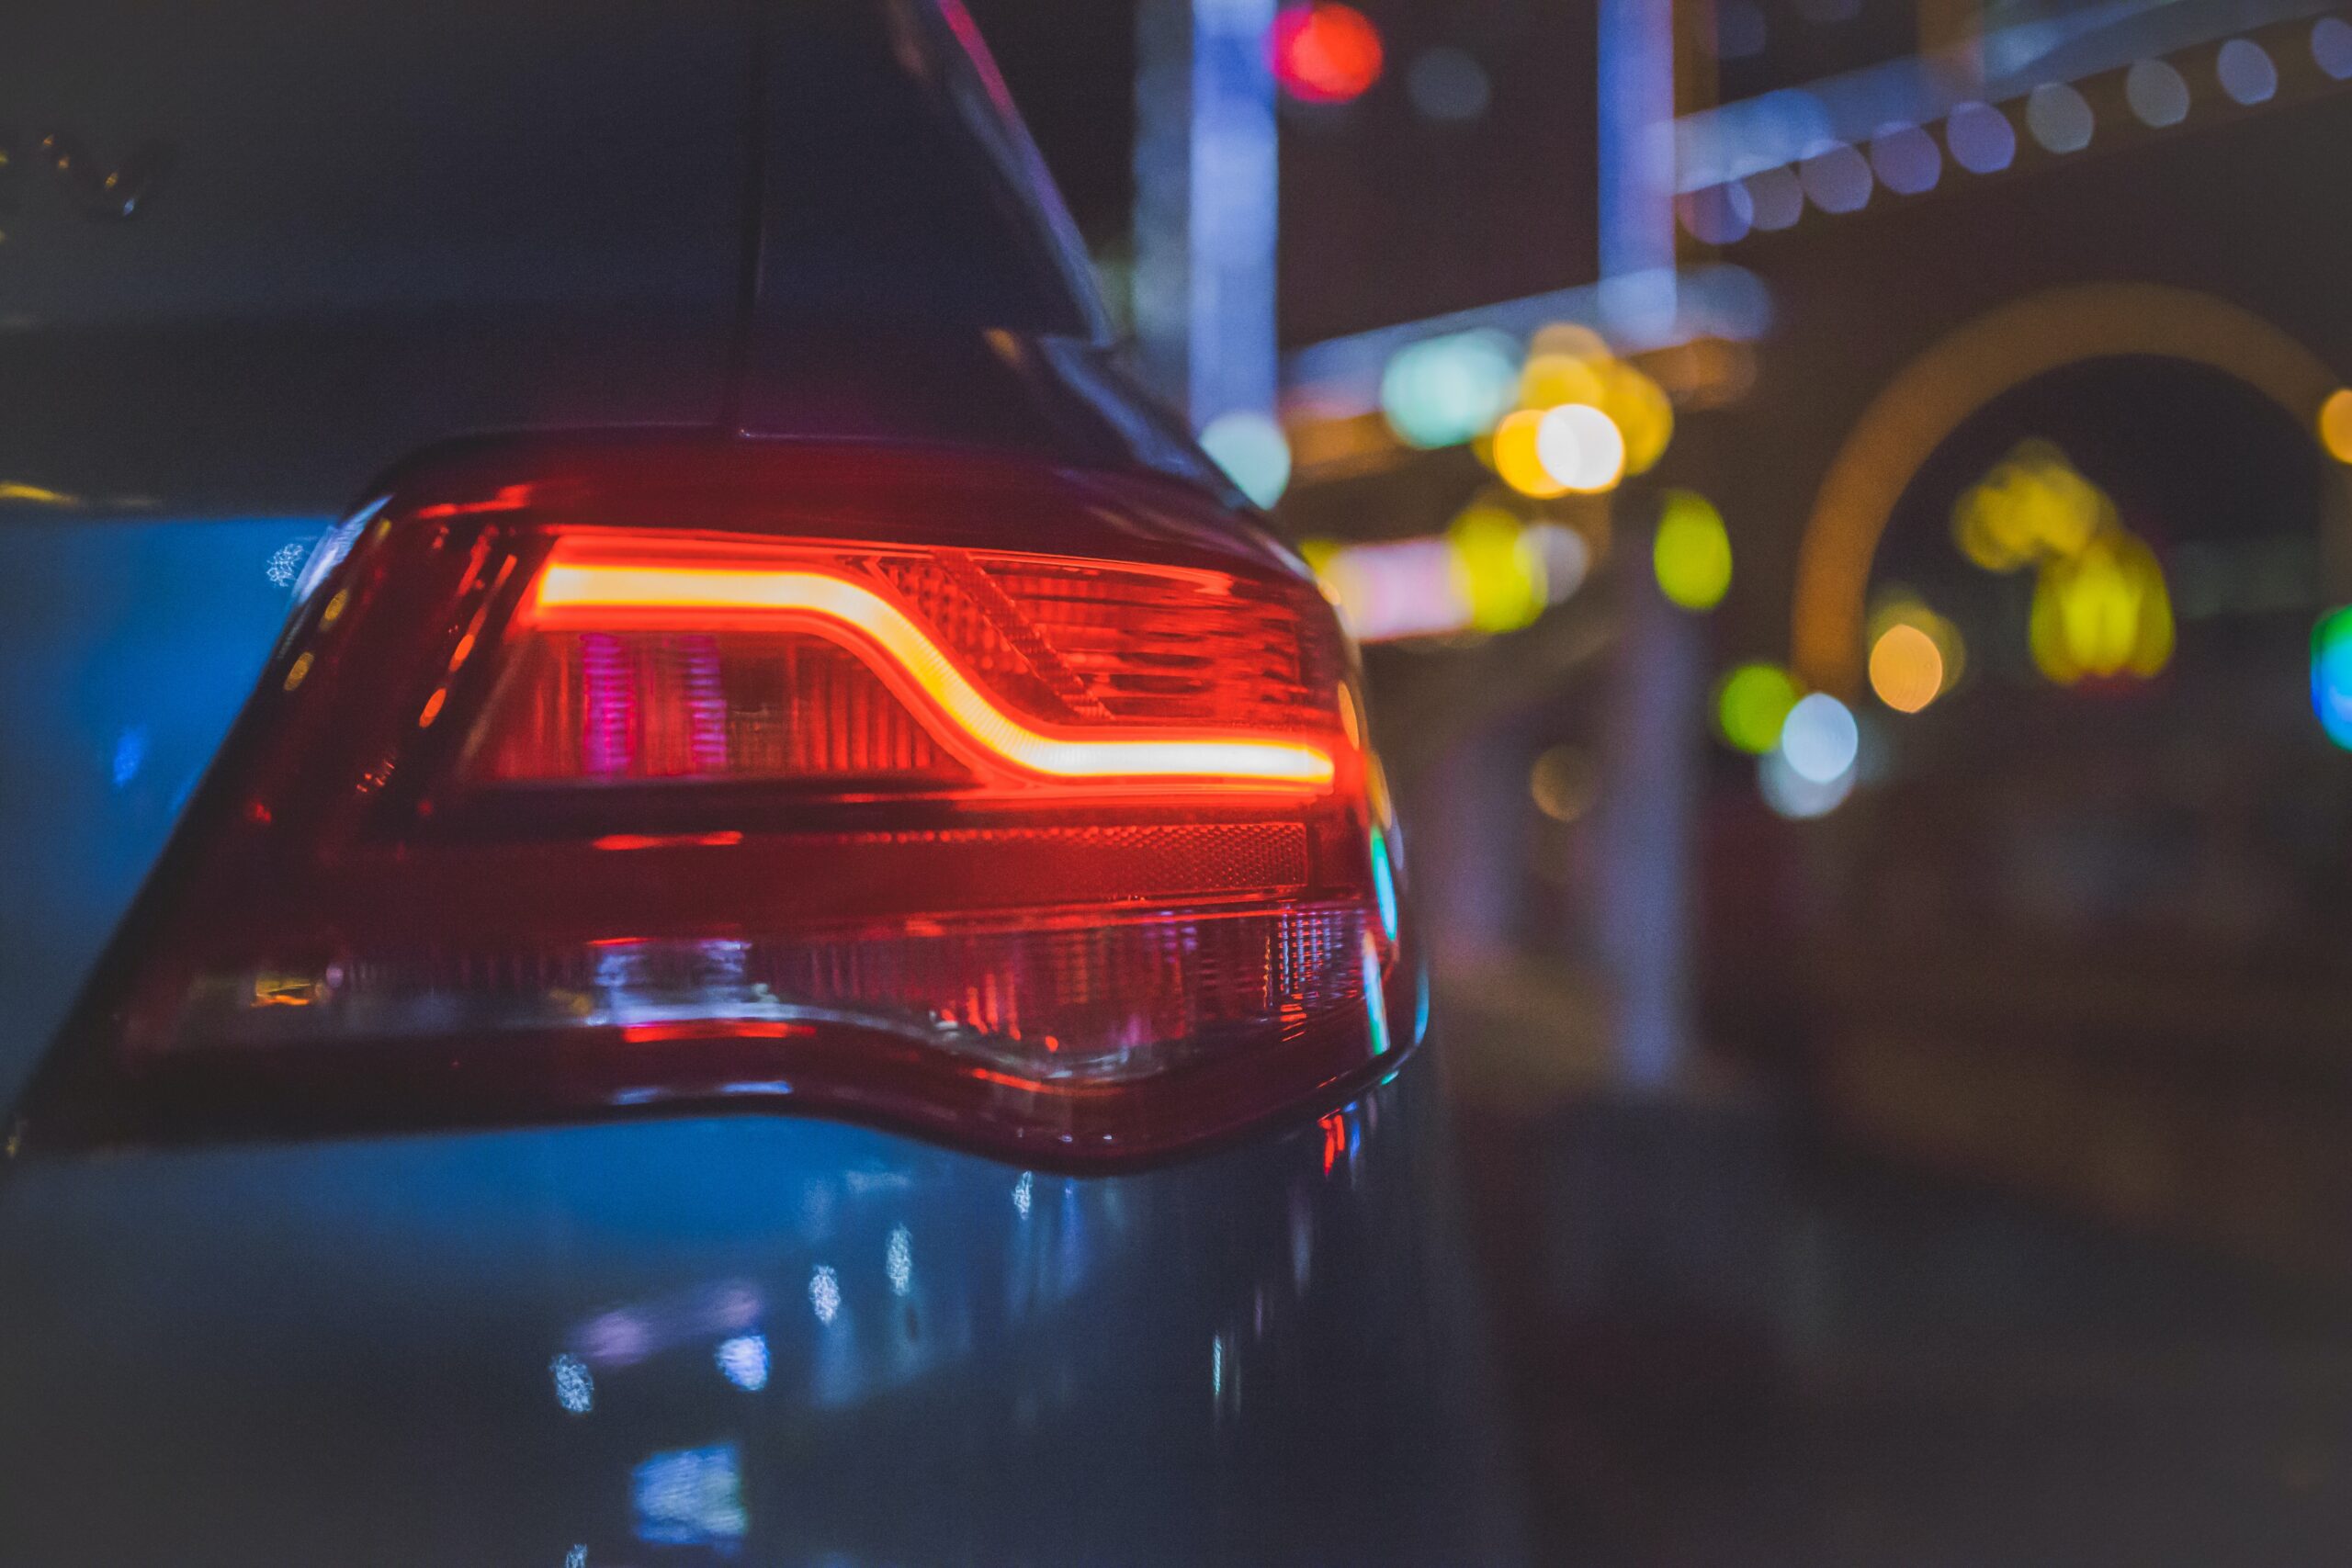 Automotive lighting systems, trends and types